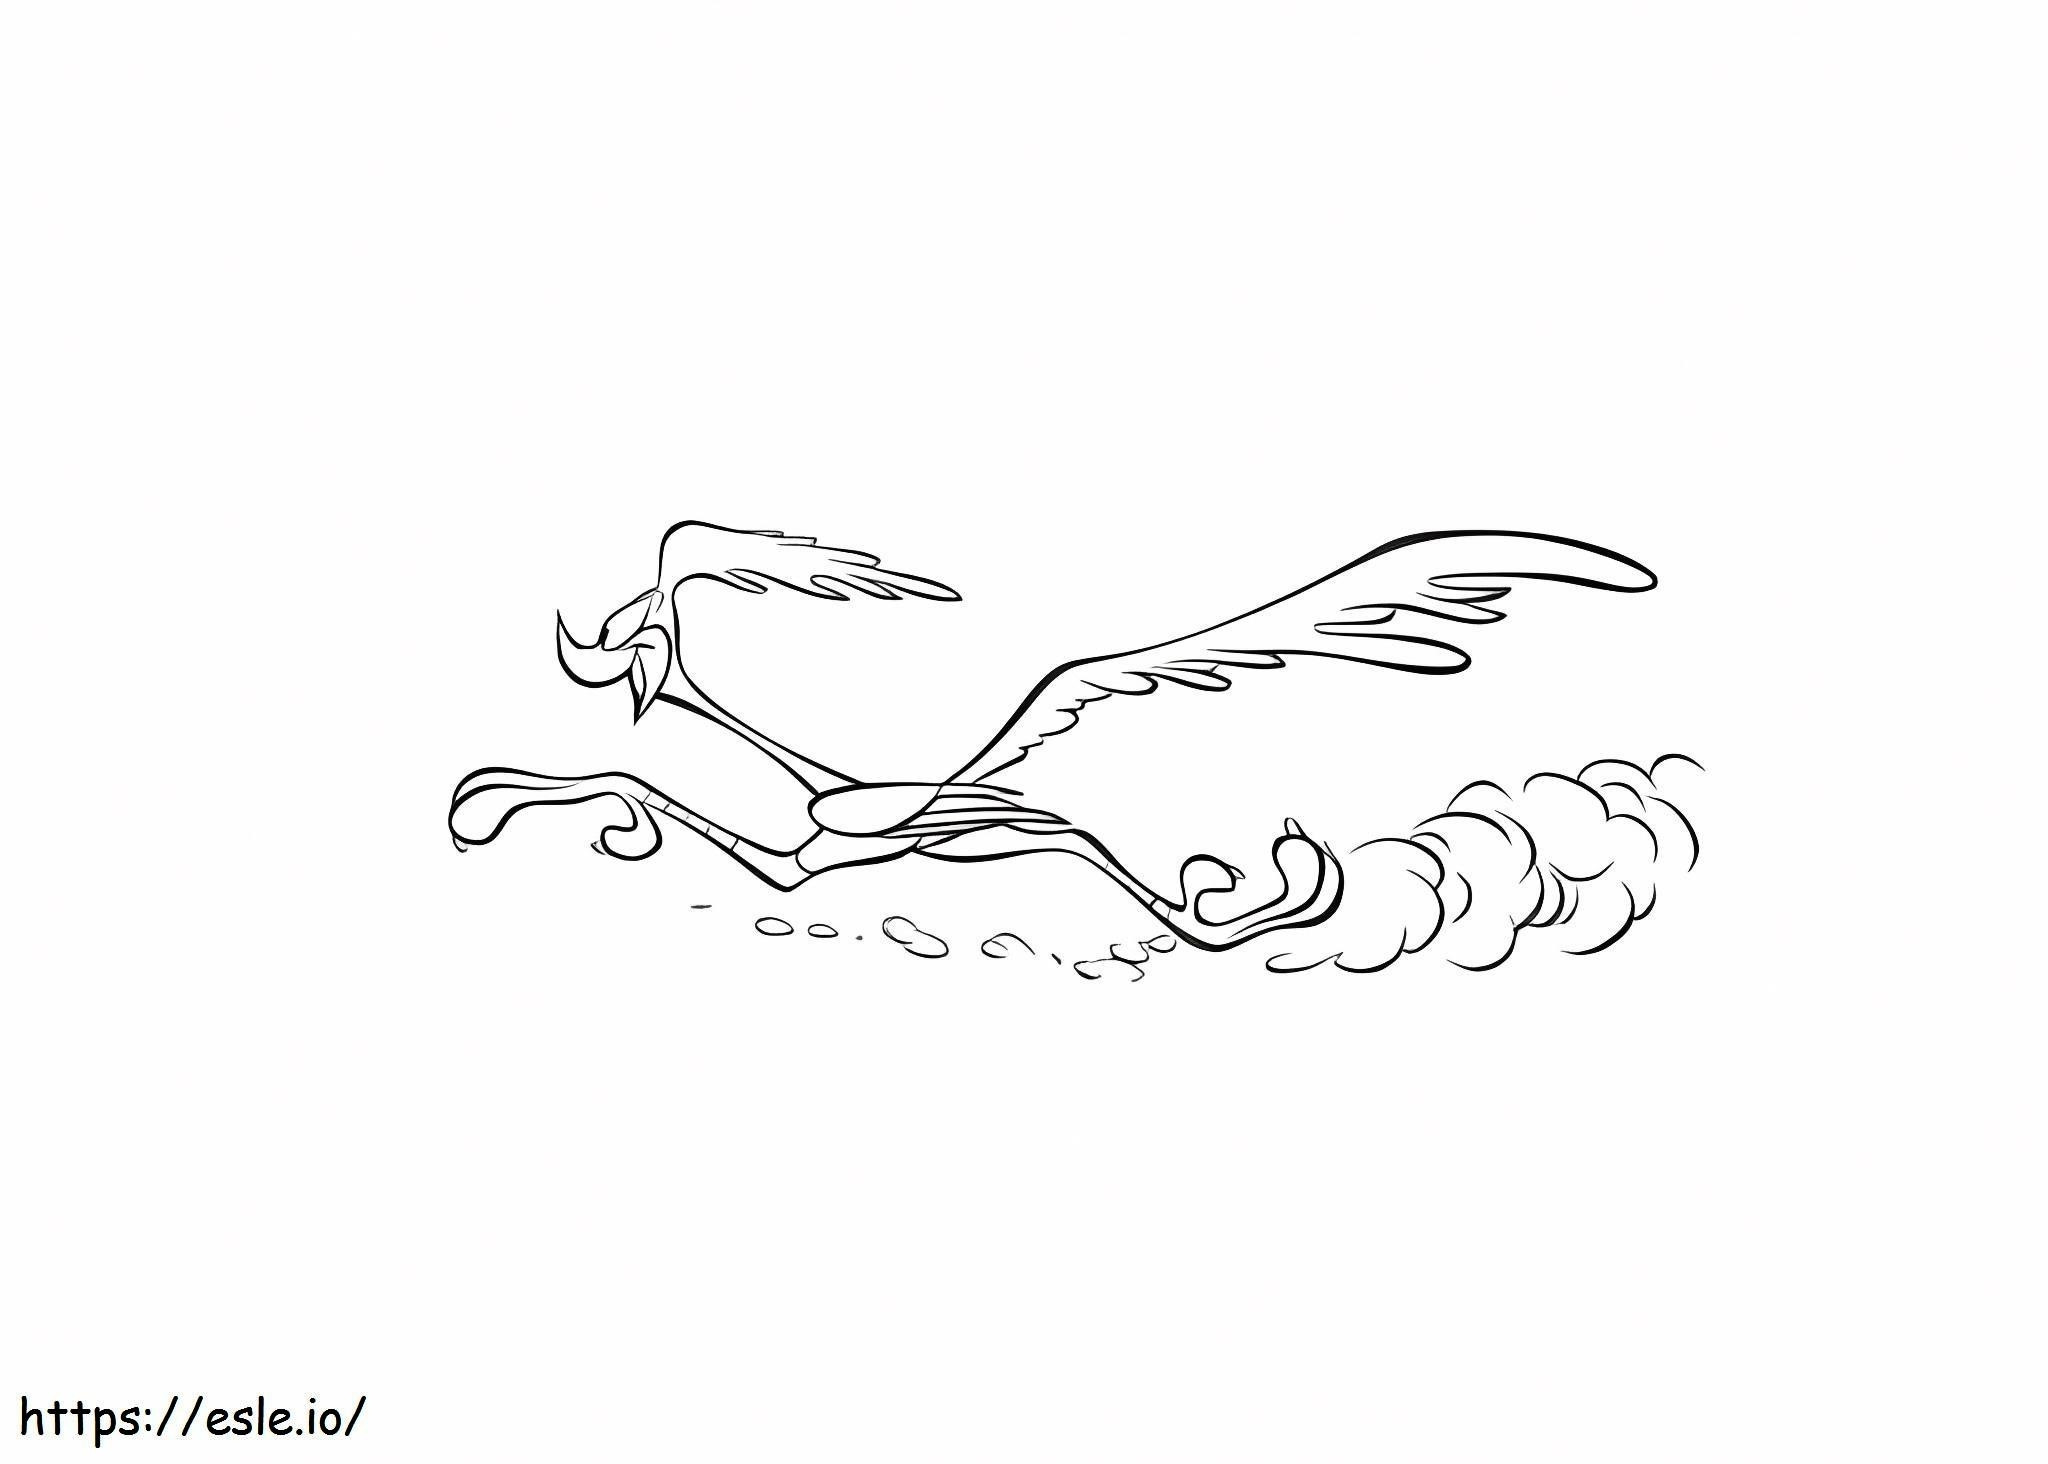 Road Runner Running coloring page